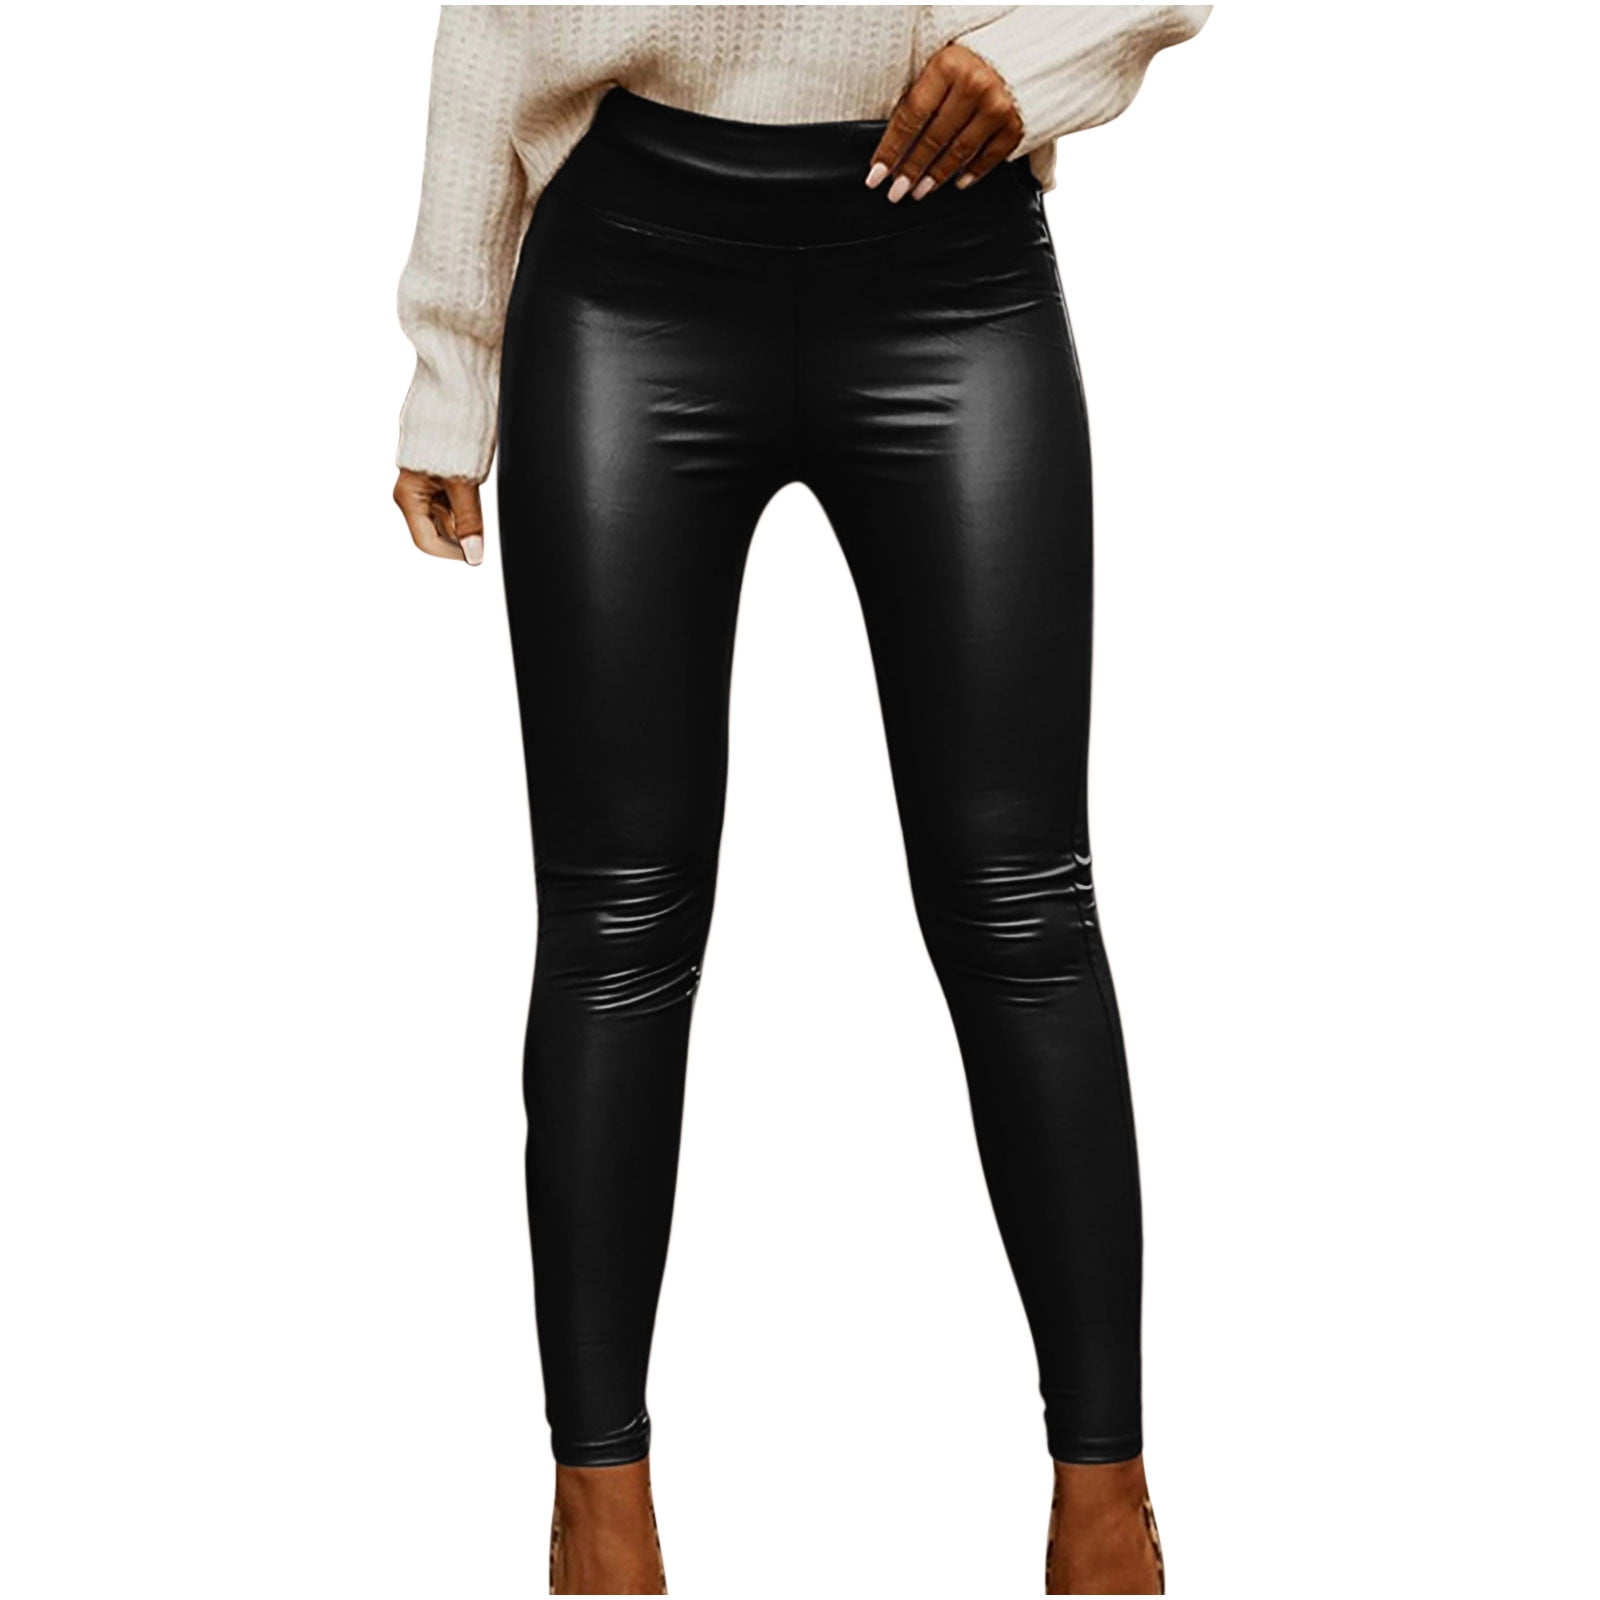 Women's Leather Leggings Pants High Waisted Butt Lifting Strechy SlimTights  Shaping Hip Push Up Sexy Pants 